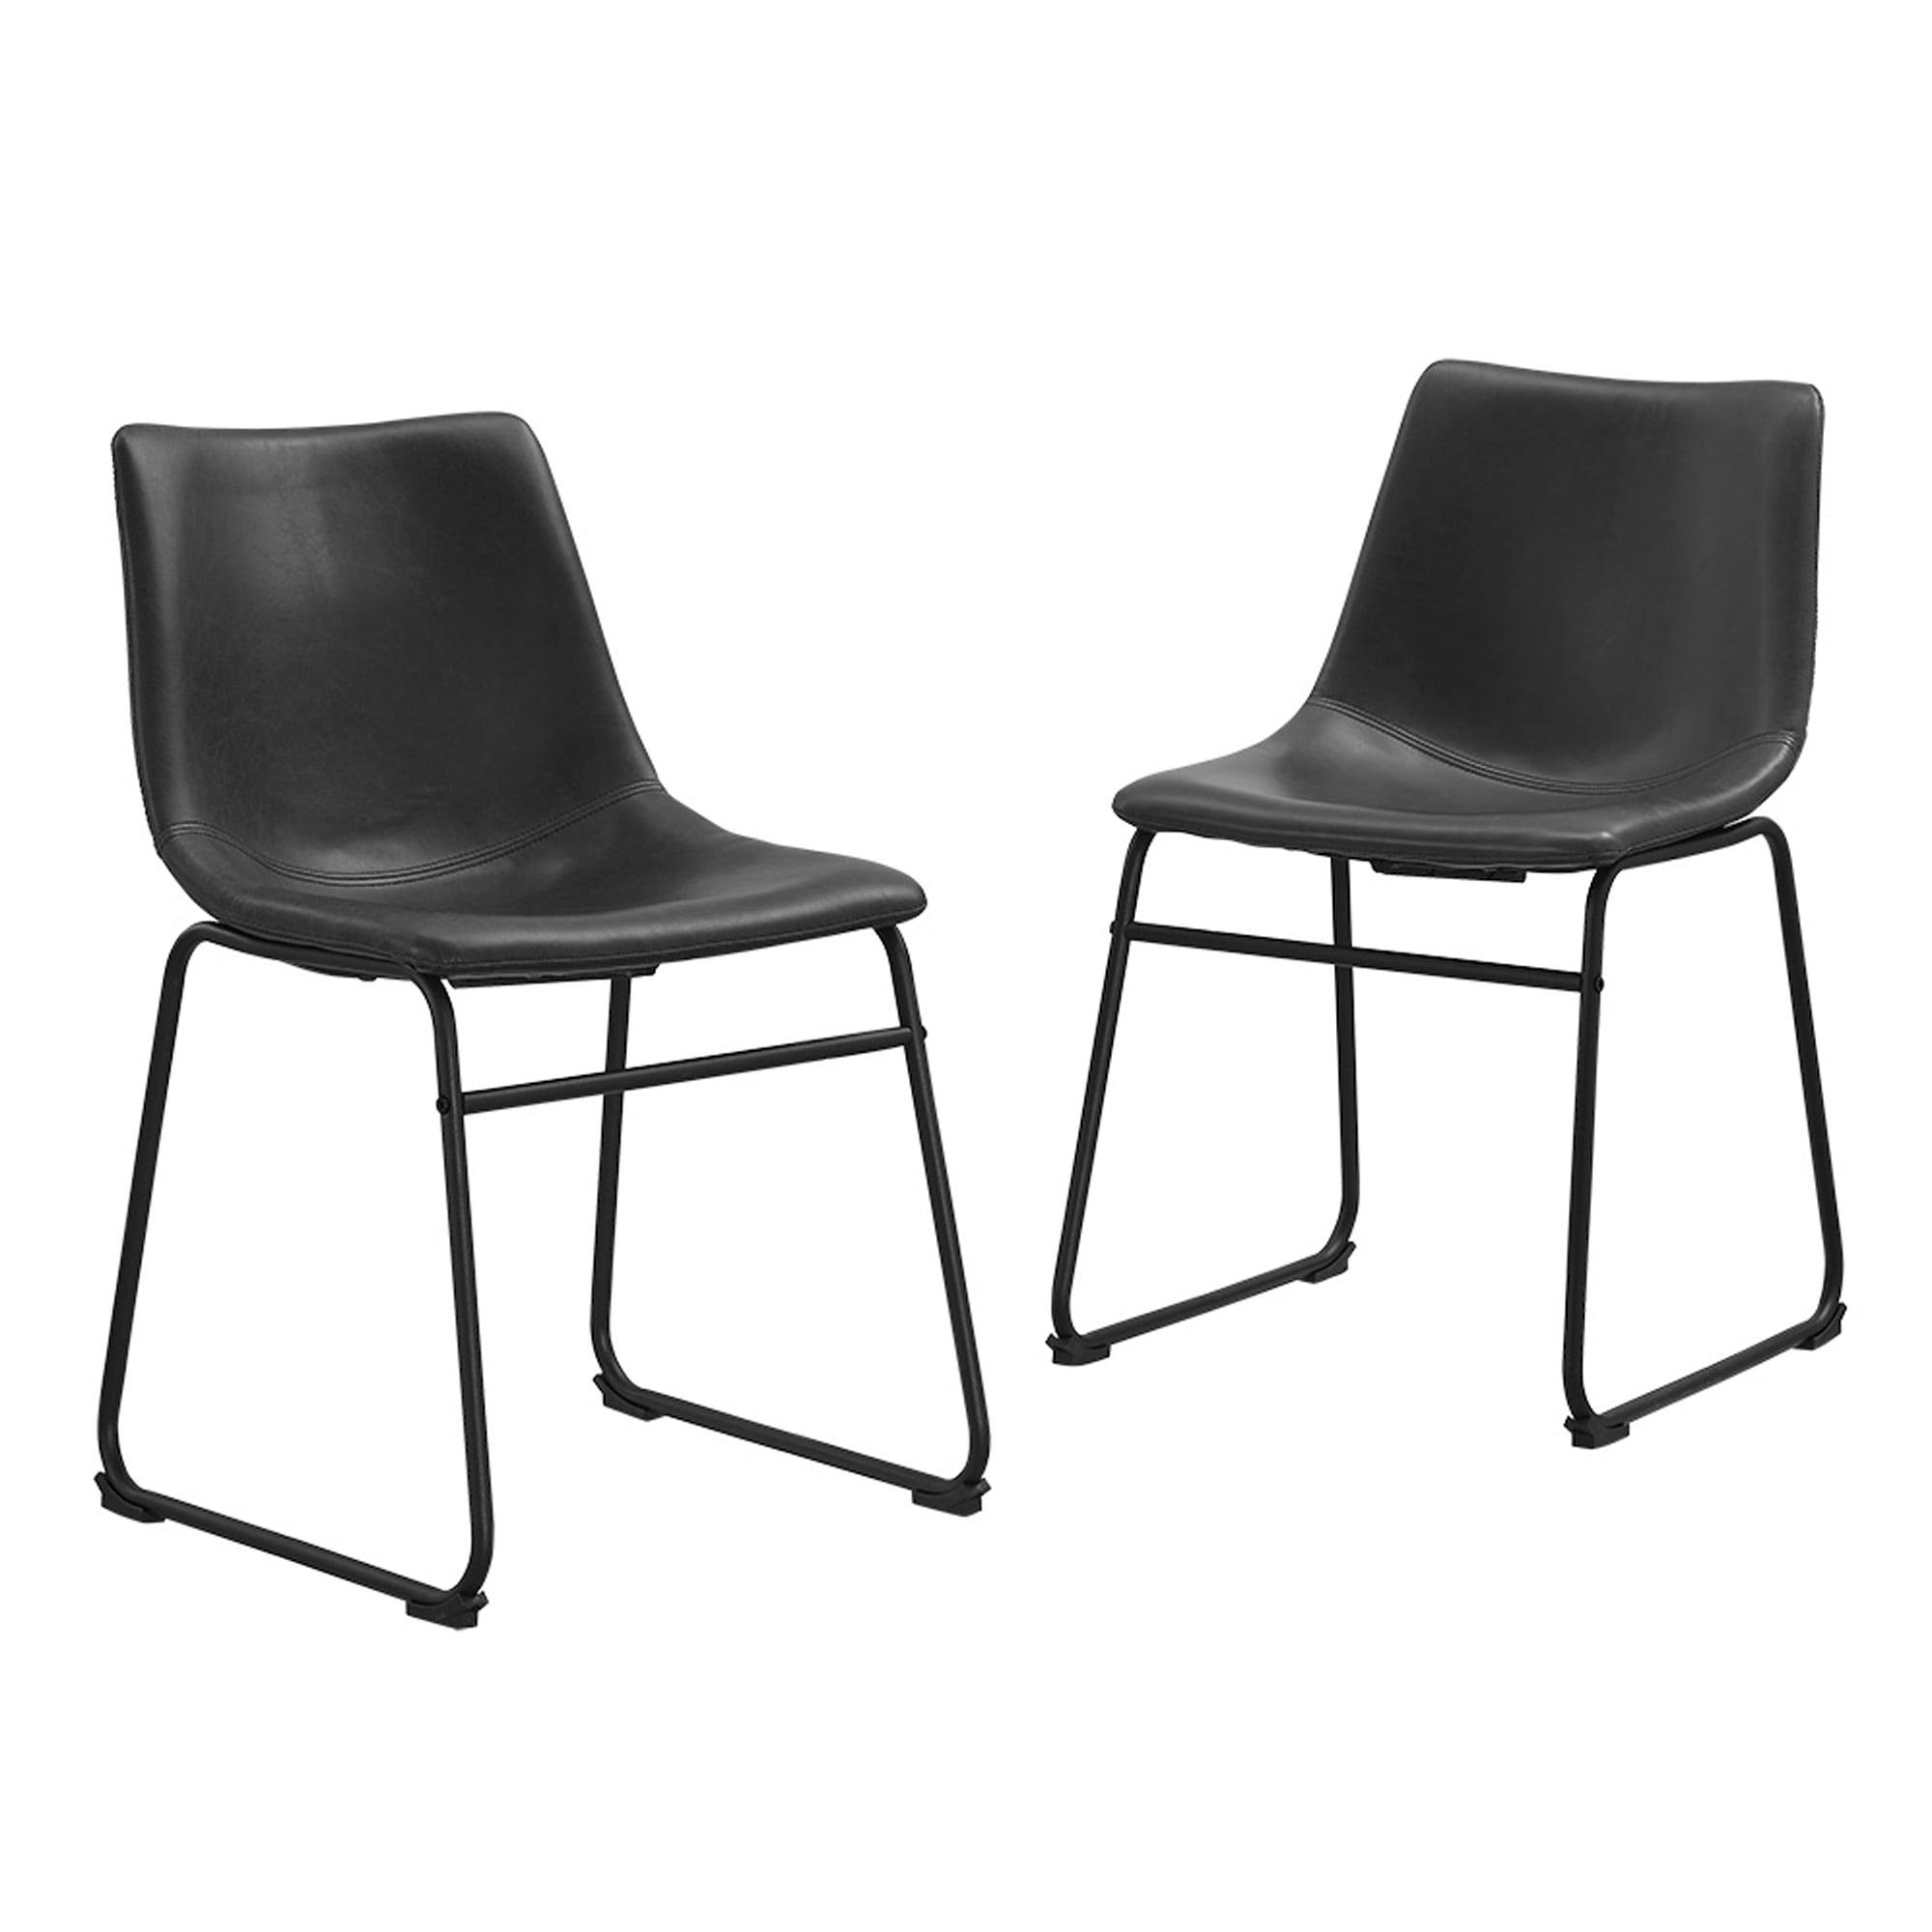 Sleek Black Faux Leather and Metal Space-Saving Dining Chair Set